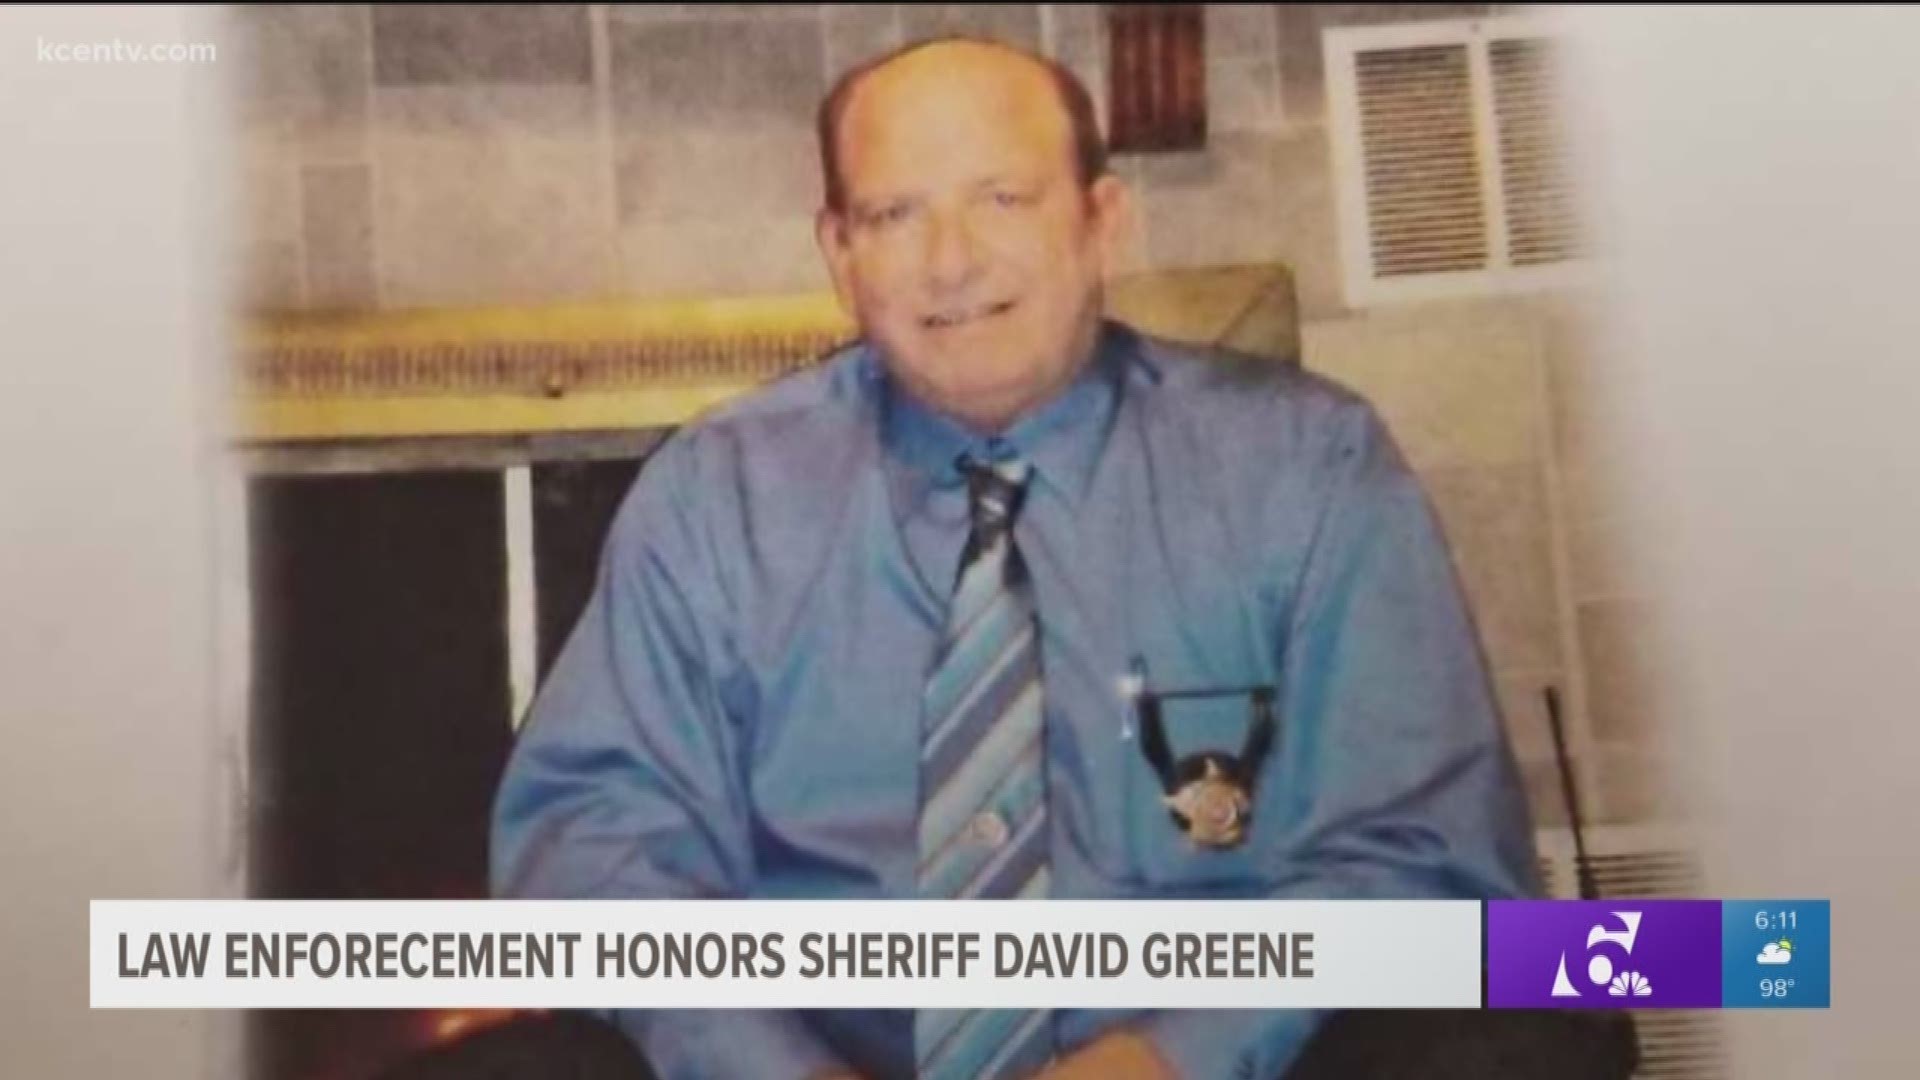 Milam County Sheriff David Green laid to rest